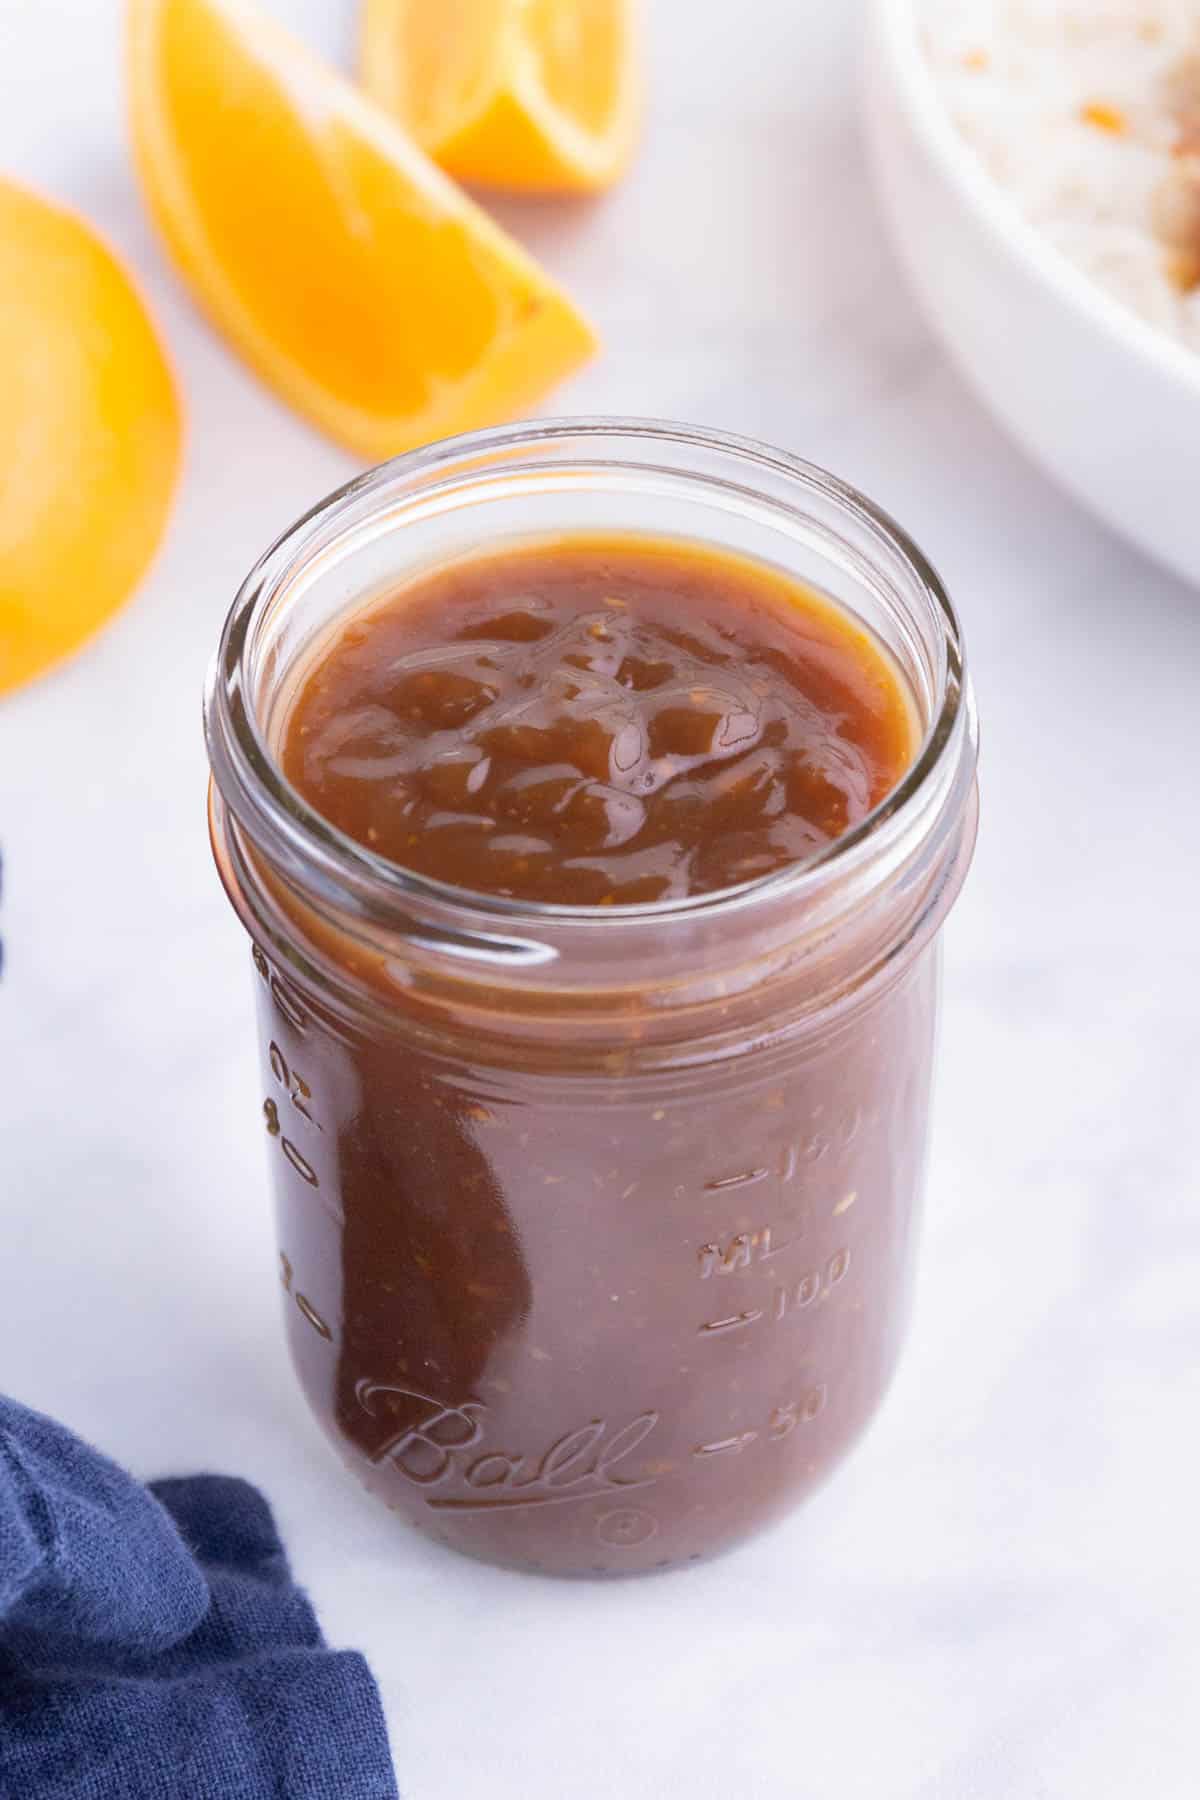 Homemade orange sauce is stored in a glass jar.